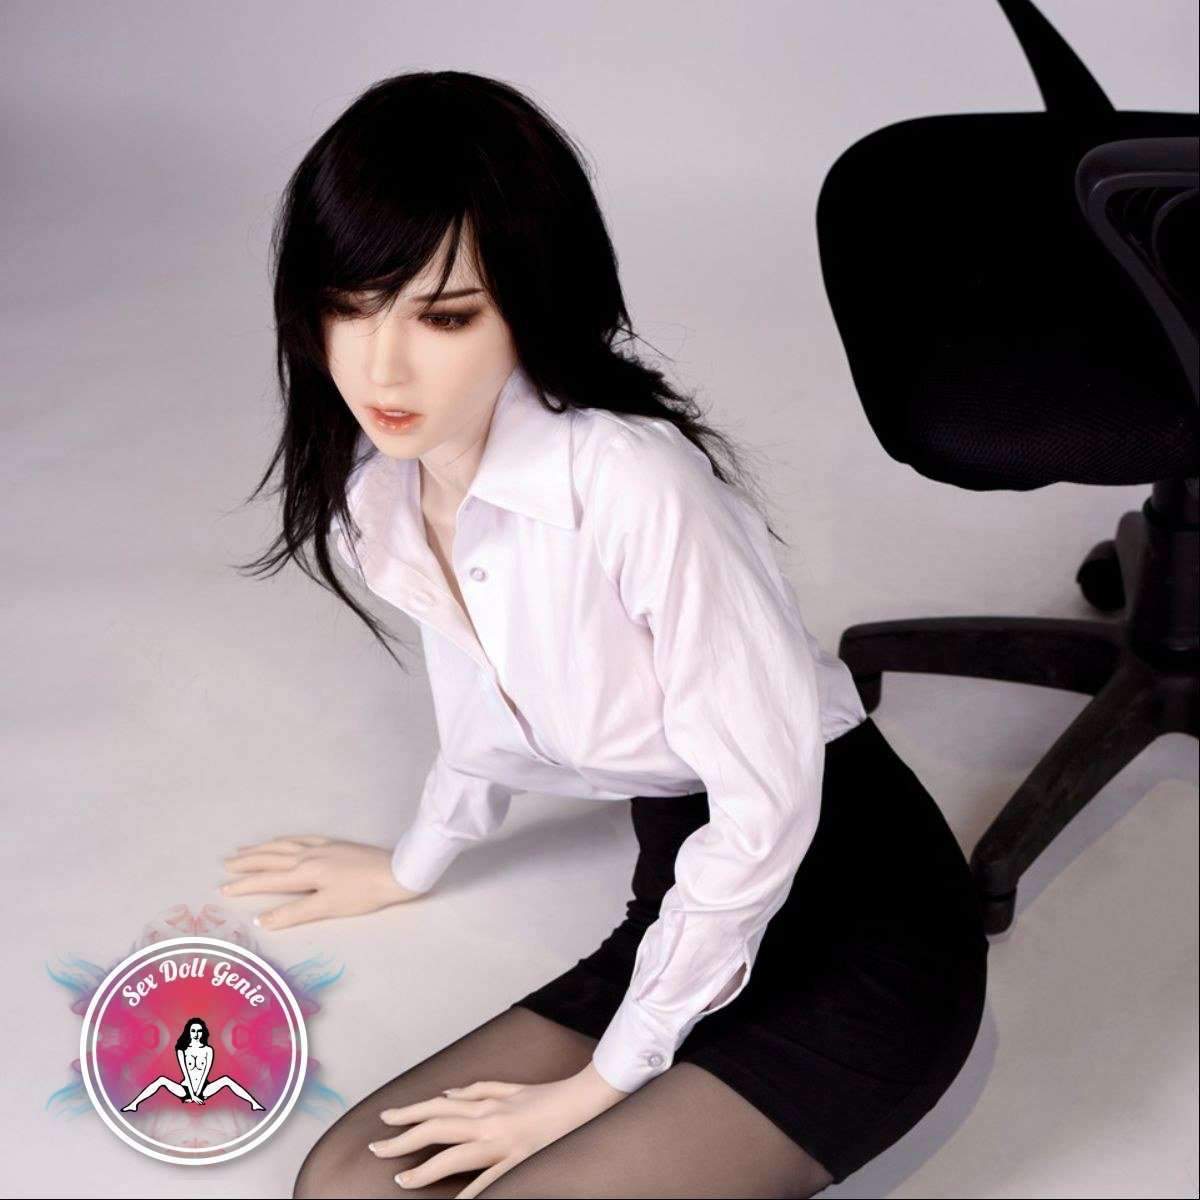 DS Doll - 167cm - Kayla Head - Type 2 D Cup Silicone Doll-18